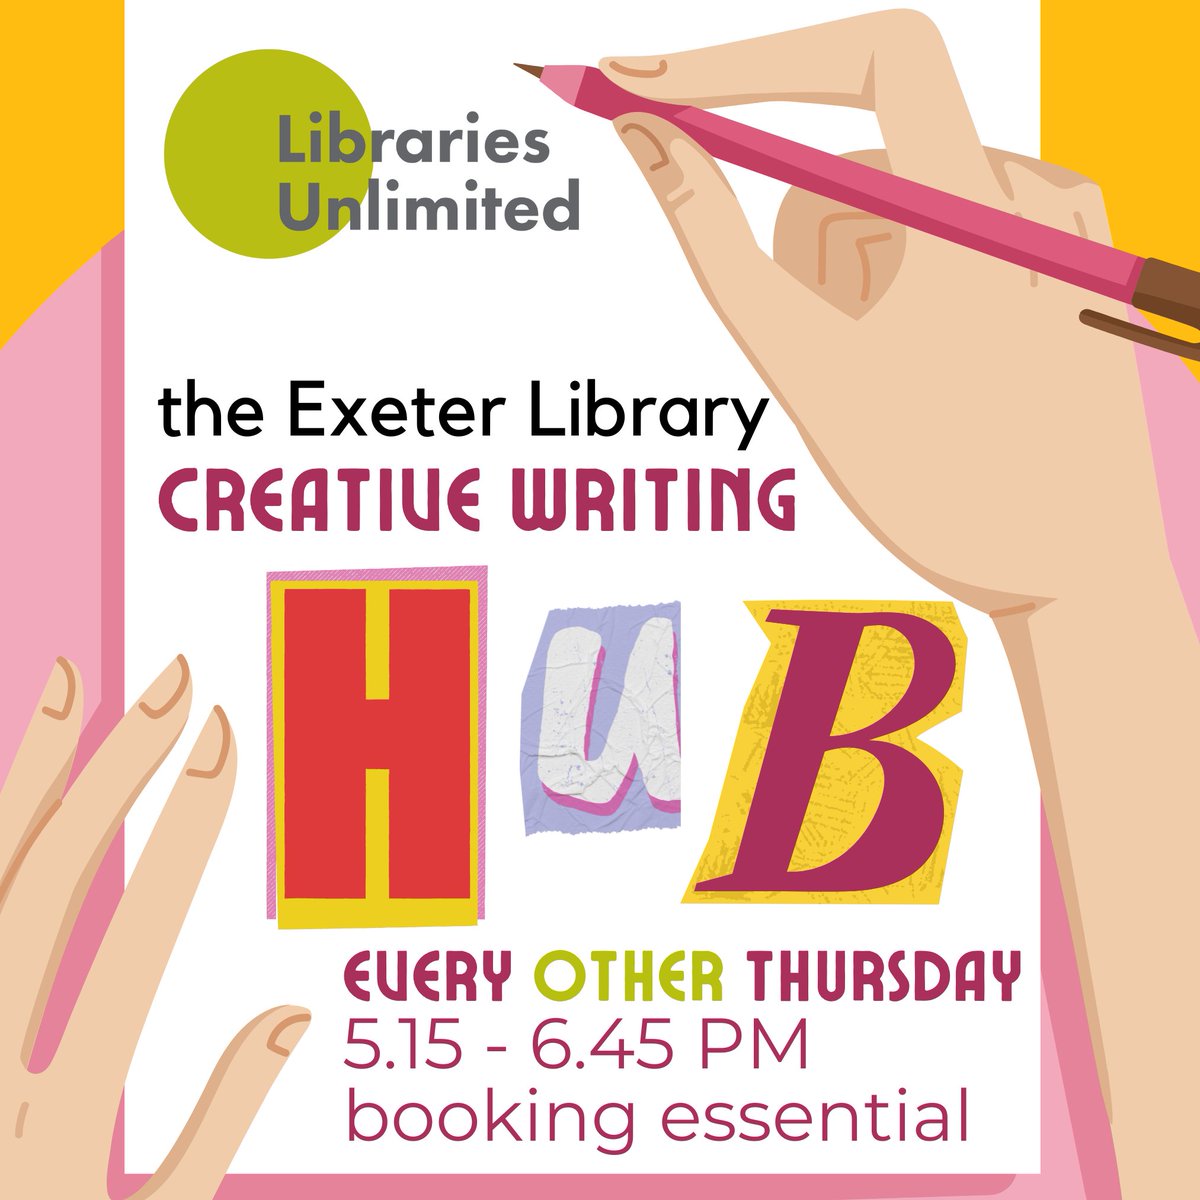 THIS THURSDAY ✍️Are you a writer looking for inspiration? Want to find others to share your work with? Why not try our Creative Writing Hub? Each week has a new focus be it poetry, short stories, publishing & more. Come to any session that interests you. shorturl.at/bCOX4